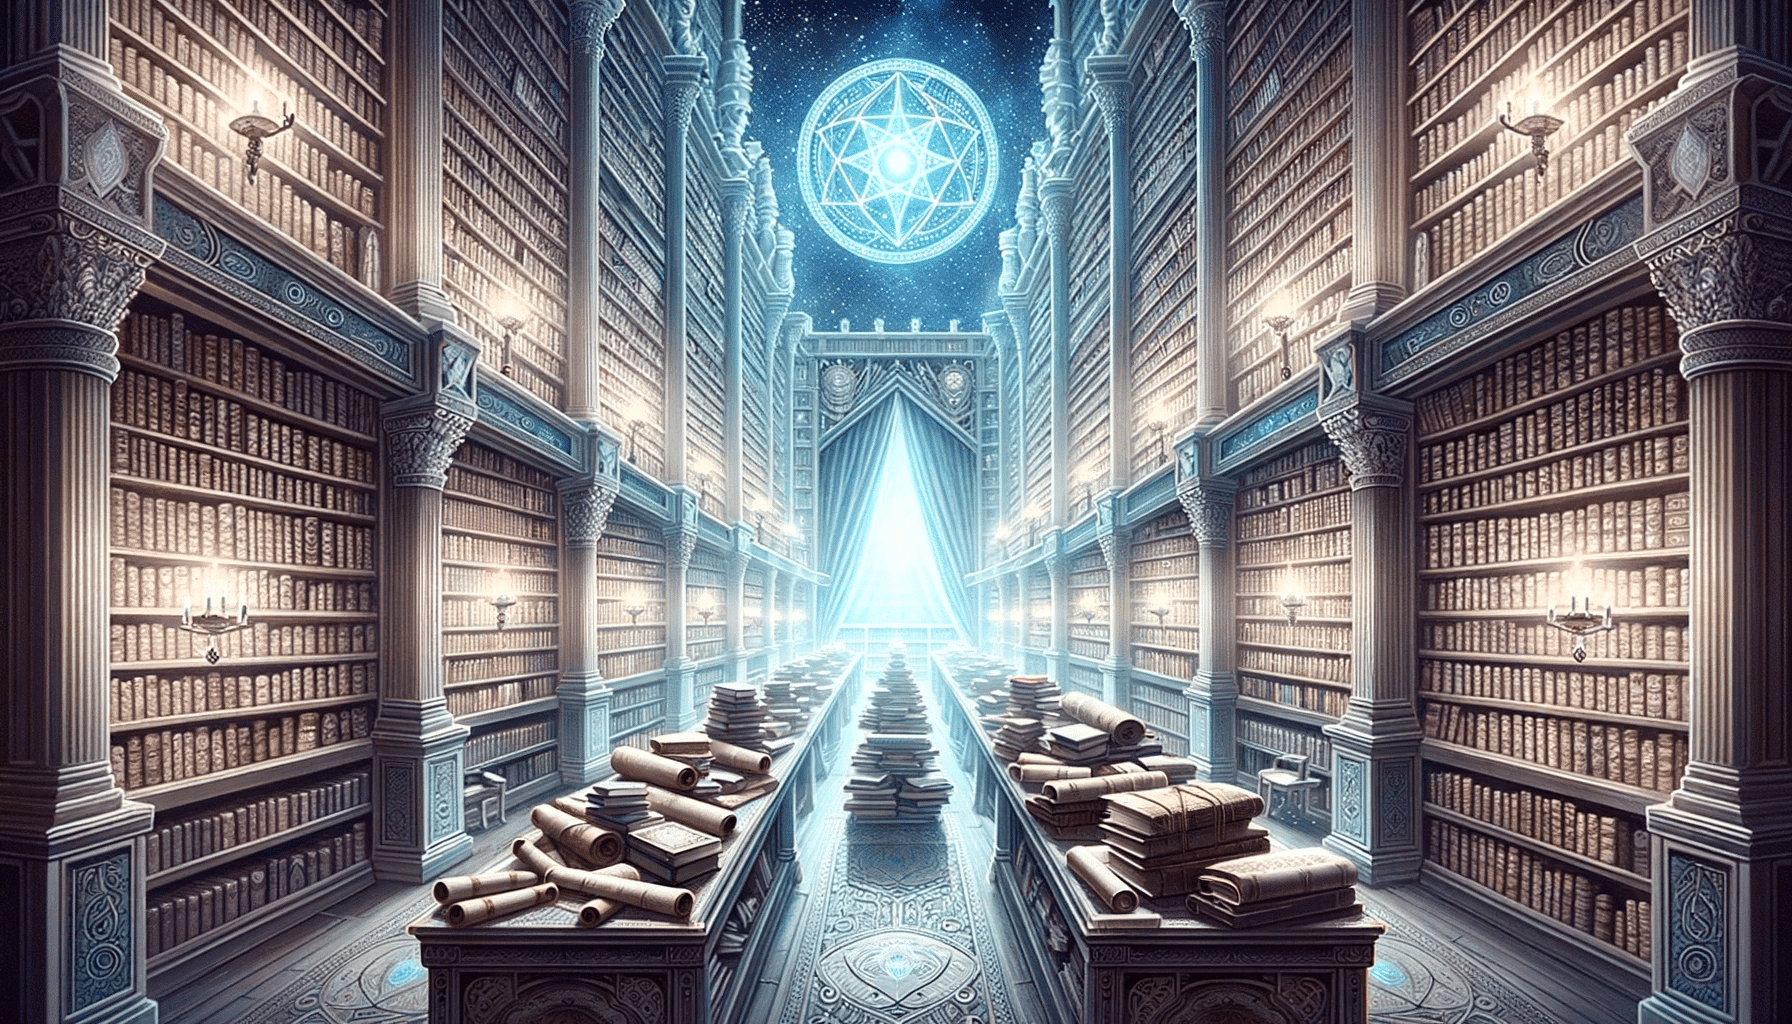 An image of a library with many books in it.